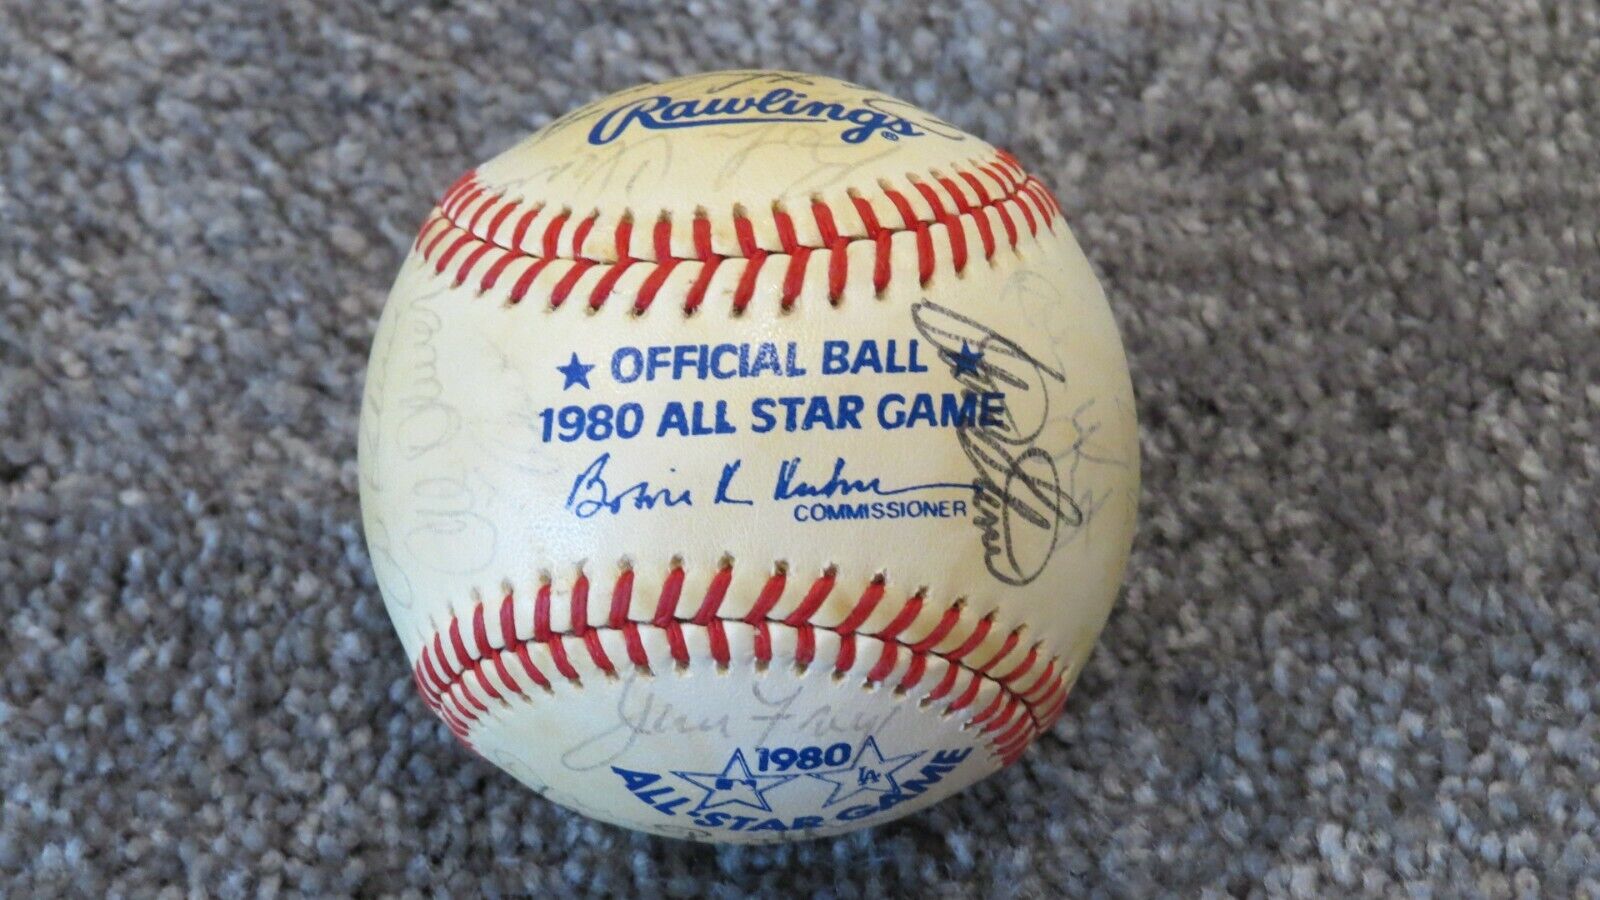 1980 American League All Star Team Signed Official Baseball Molitor, Kaline + 